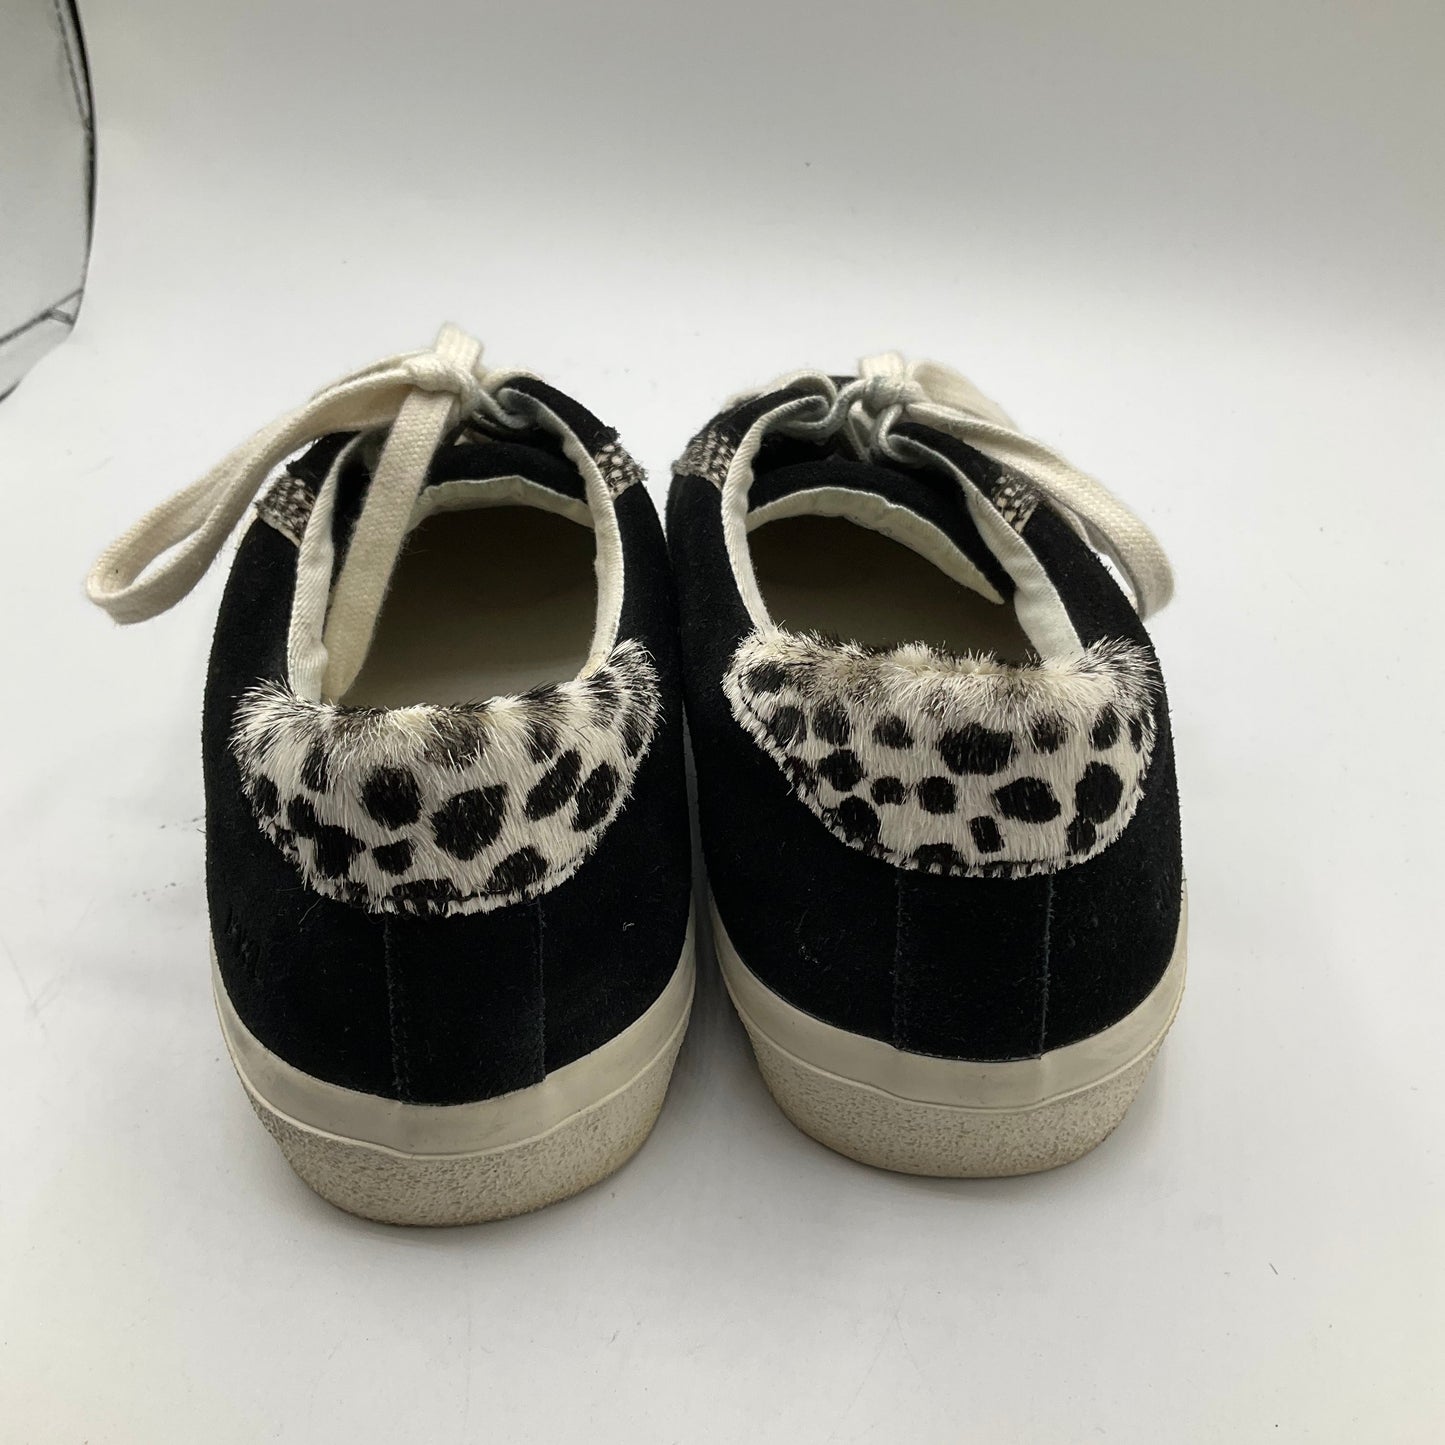 Shoes Sneakers By Madewell  Size: 8.5